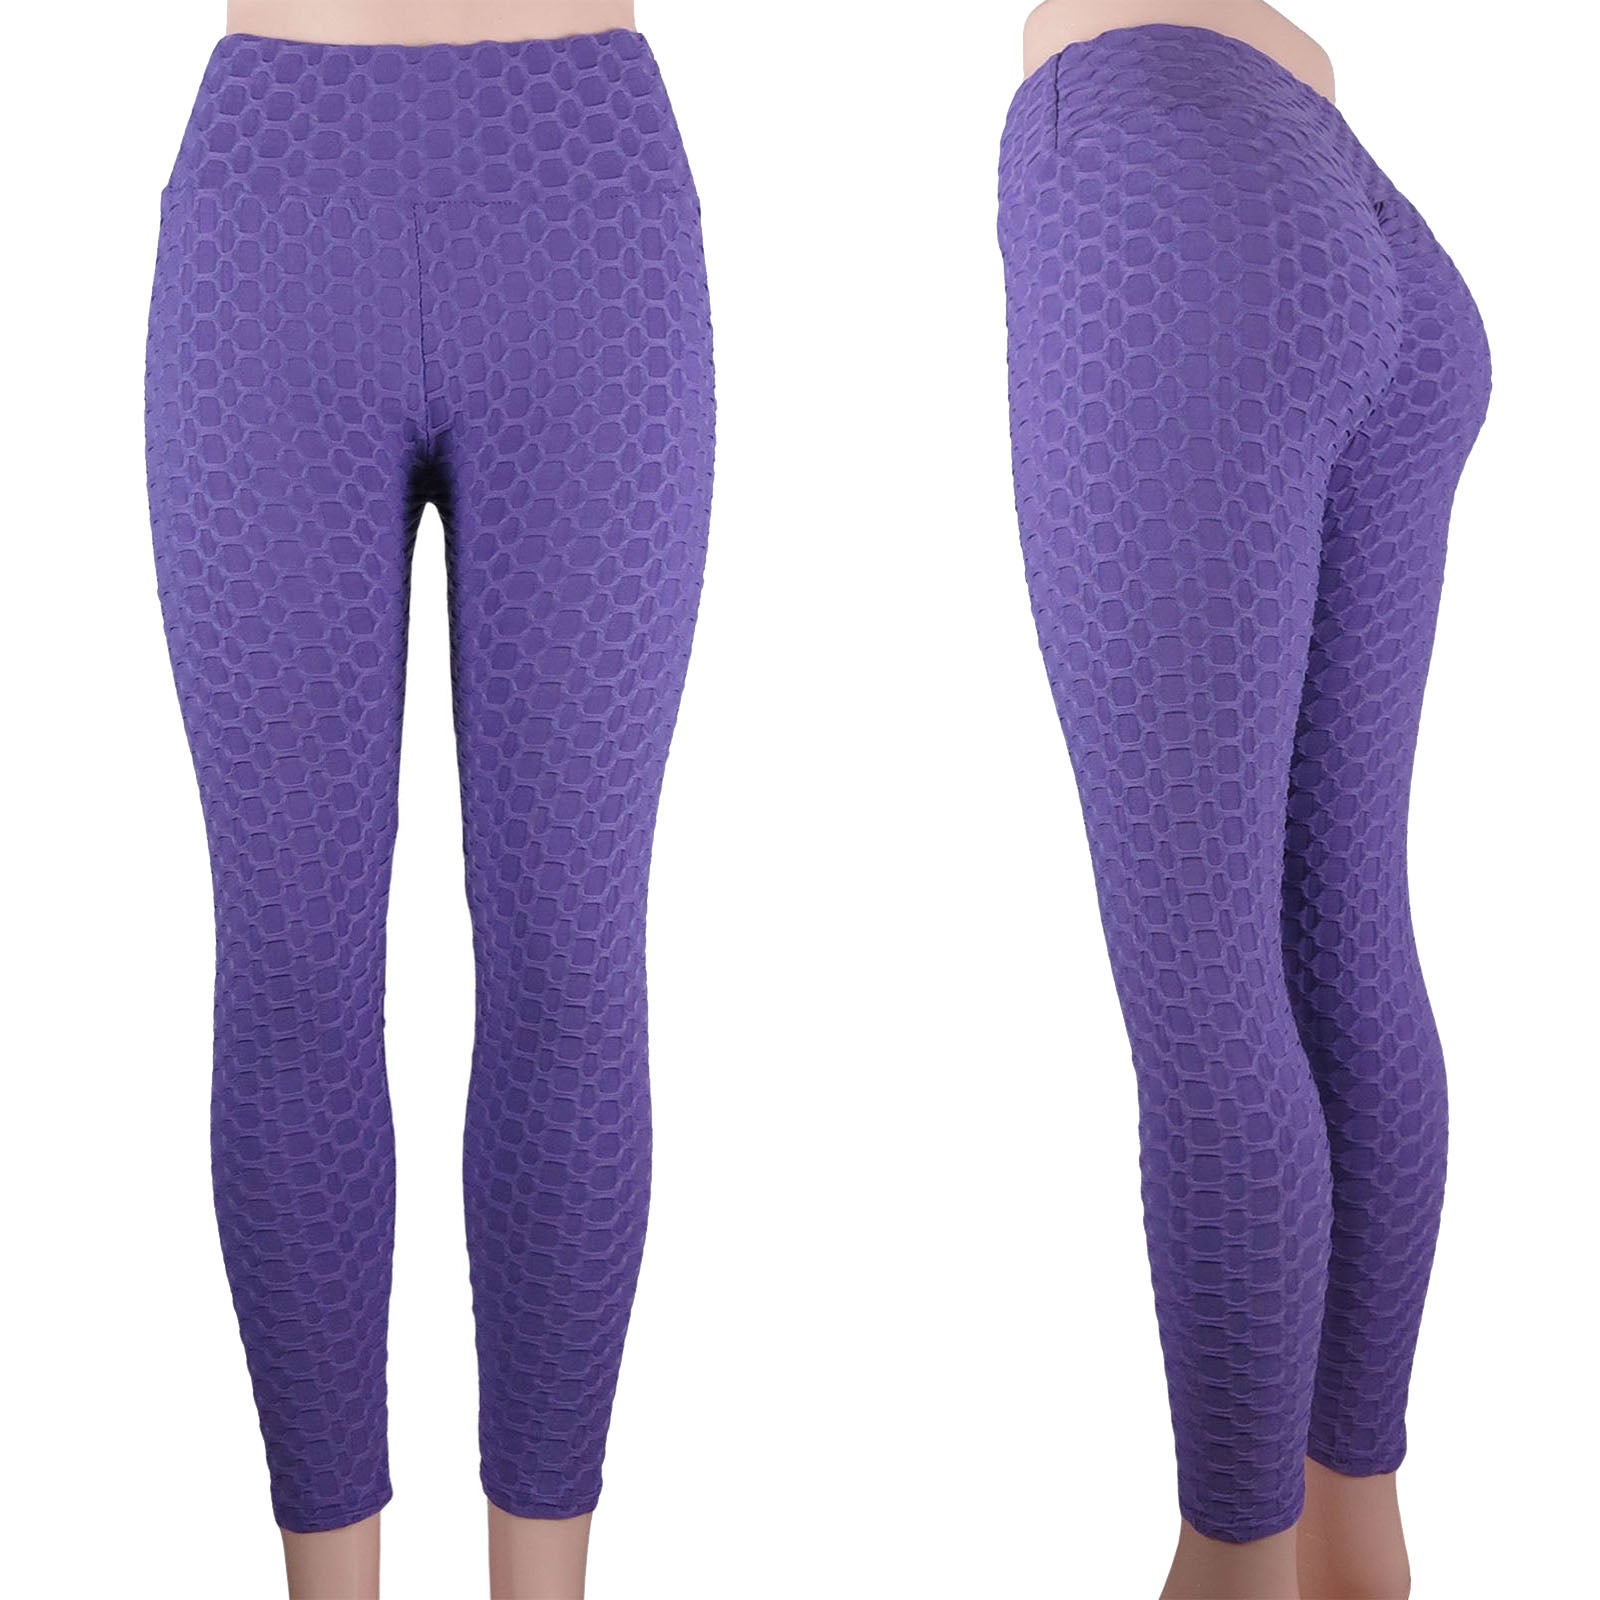 Wholesale bubble pattern tiktok leggings with a high waist and anti cellulite scrunch butt compression in purple